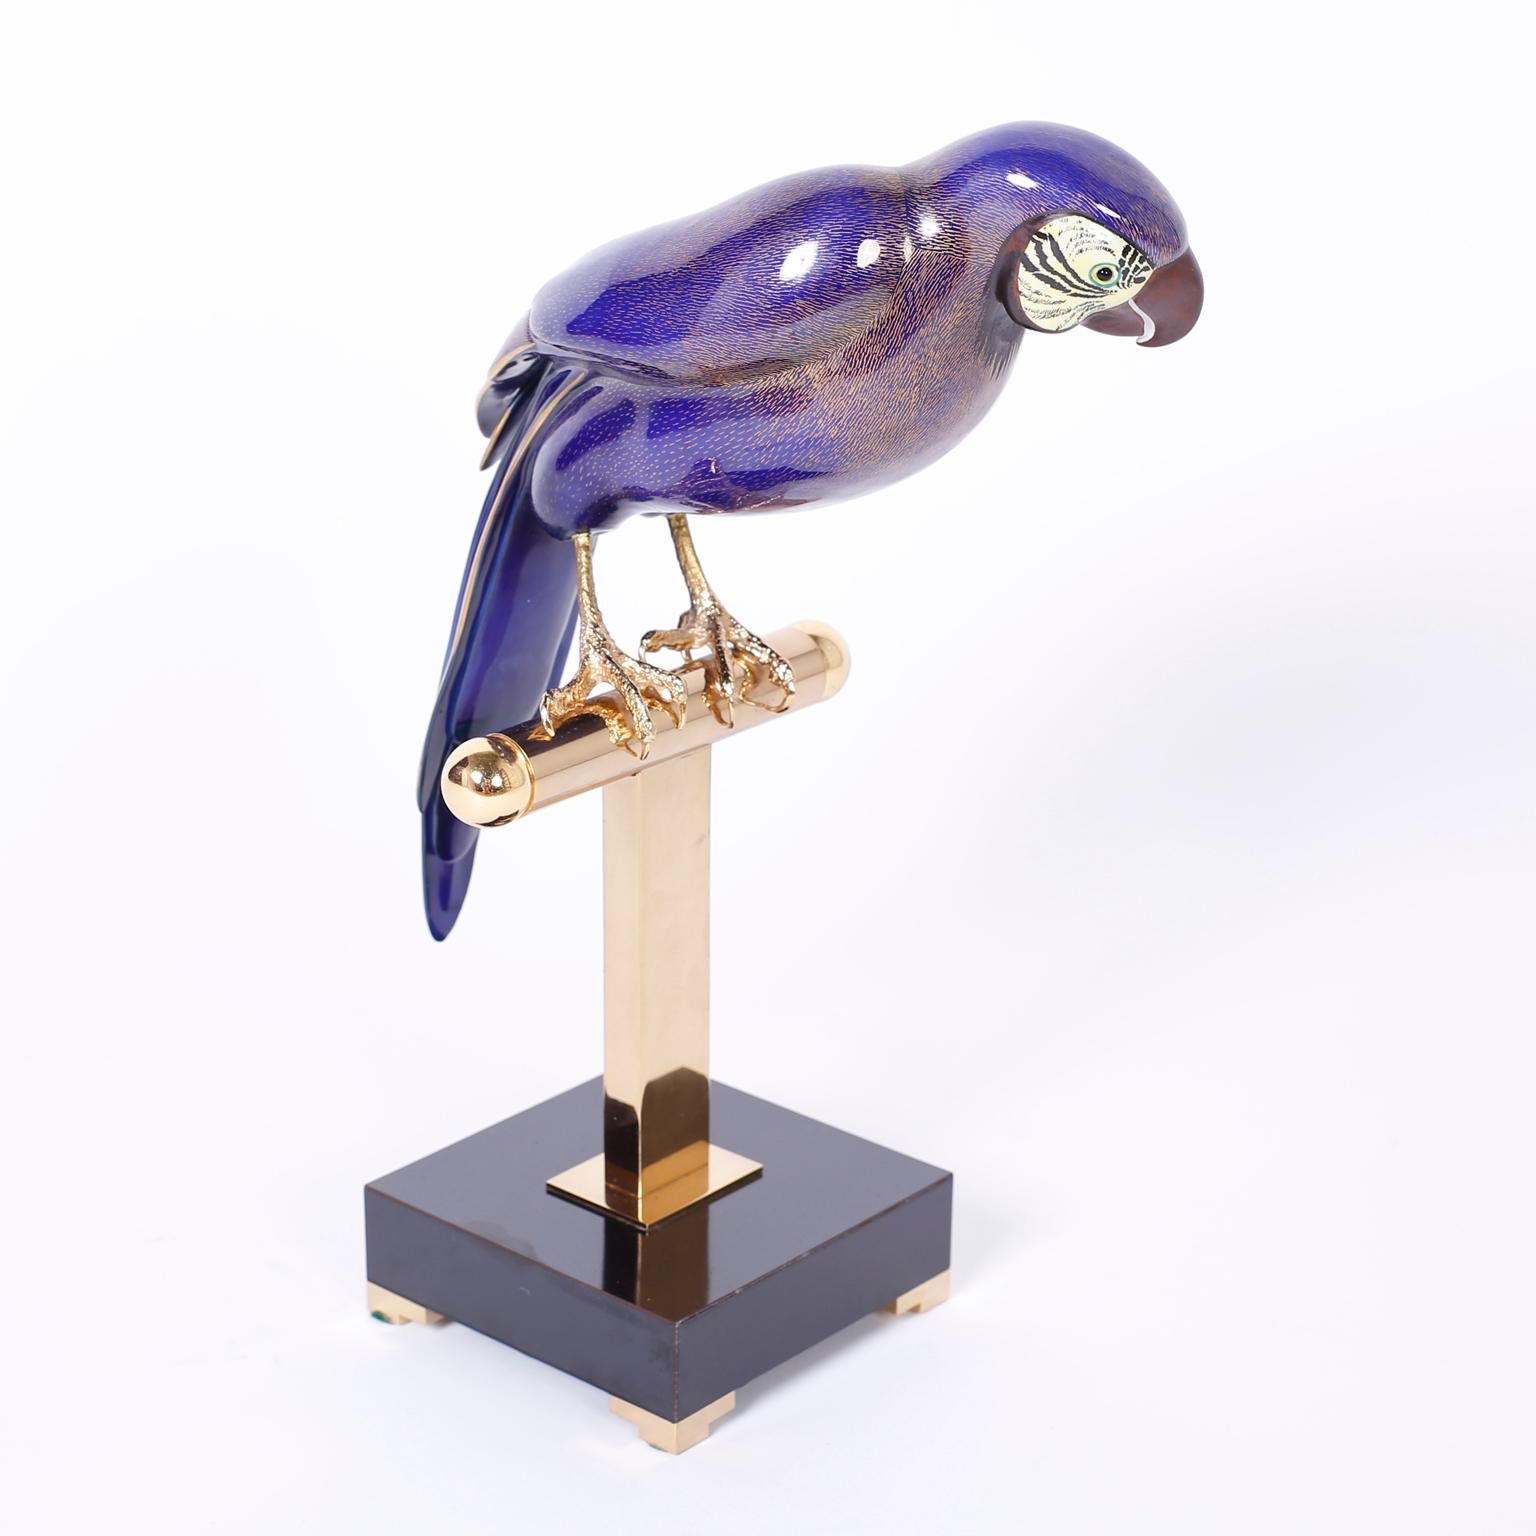 Art deco style parrot or bird decorated with an alluring indigo blue enamel over brass and perched on a polished and lacquered perch set on a streamlined base. Signed Mangani Oggetti on the inside of the tail feather.